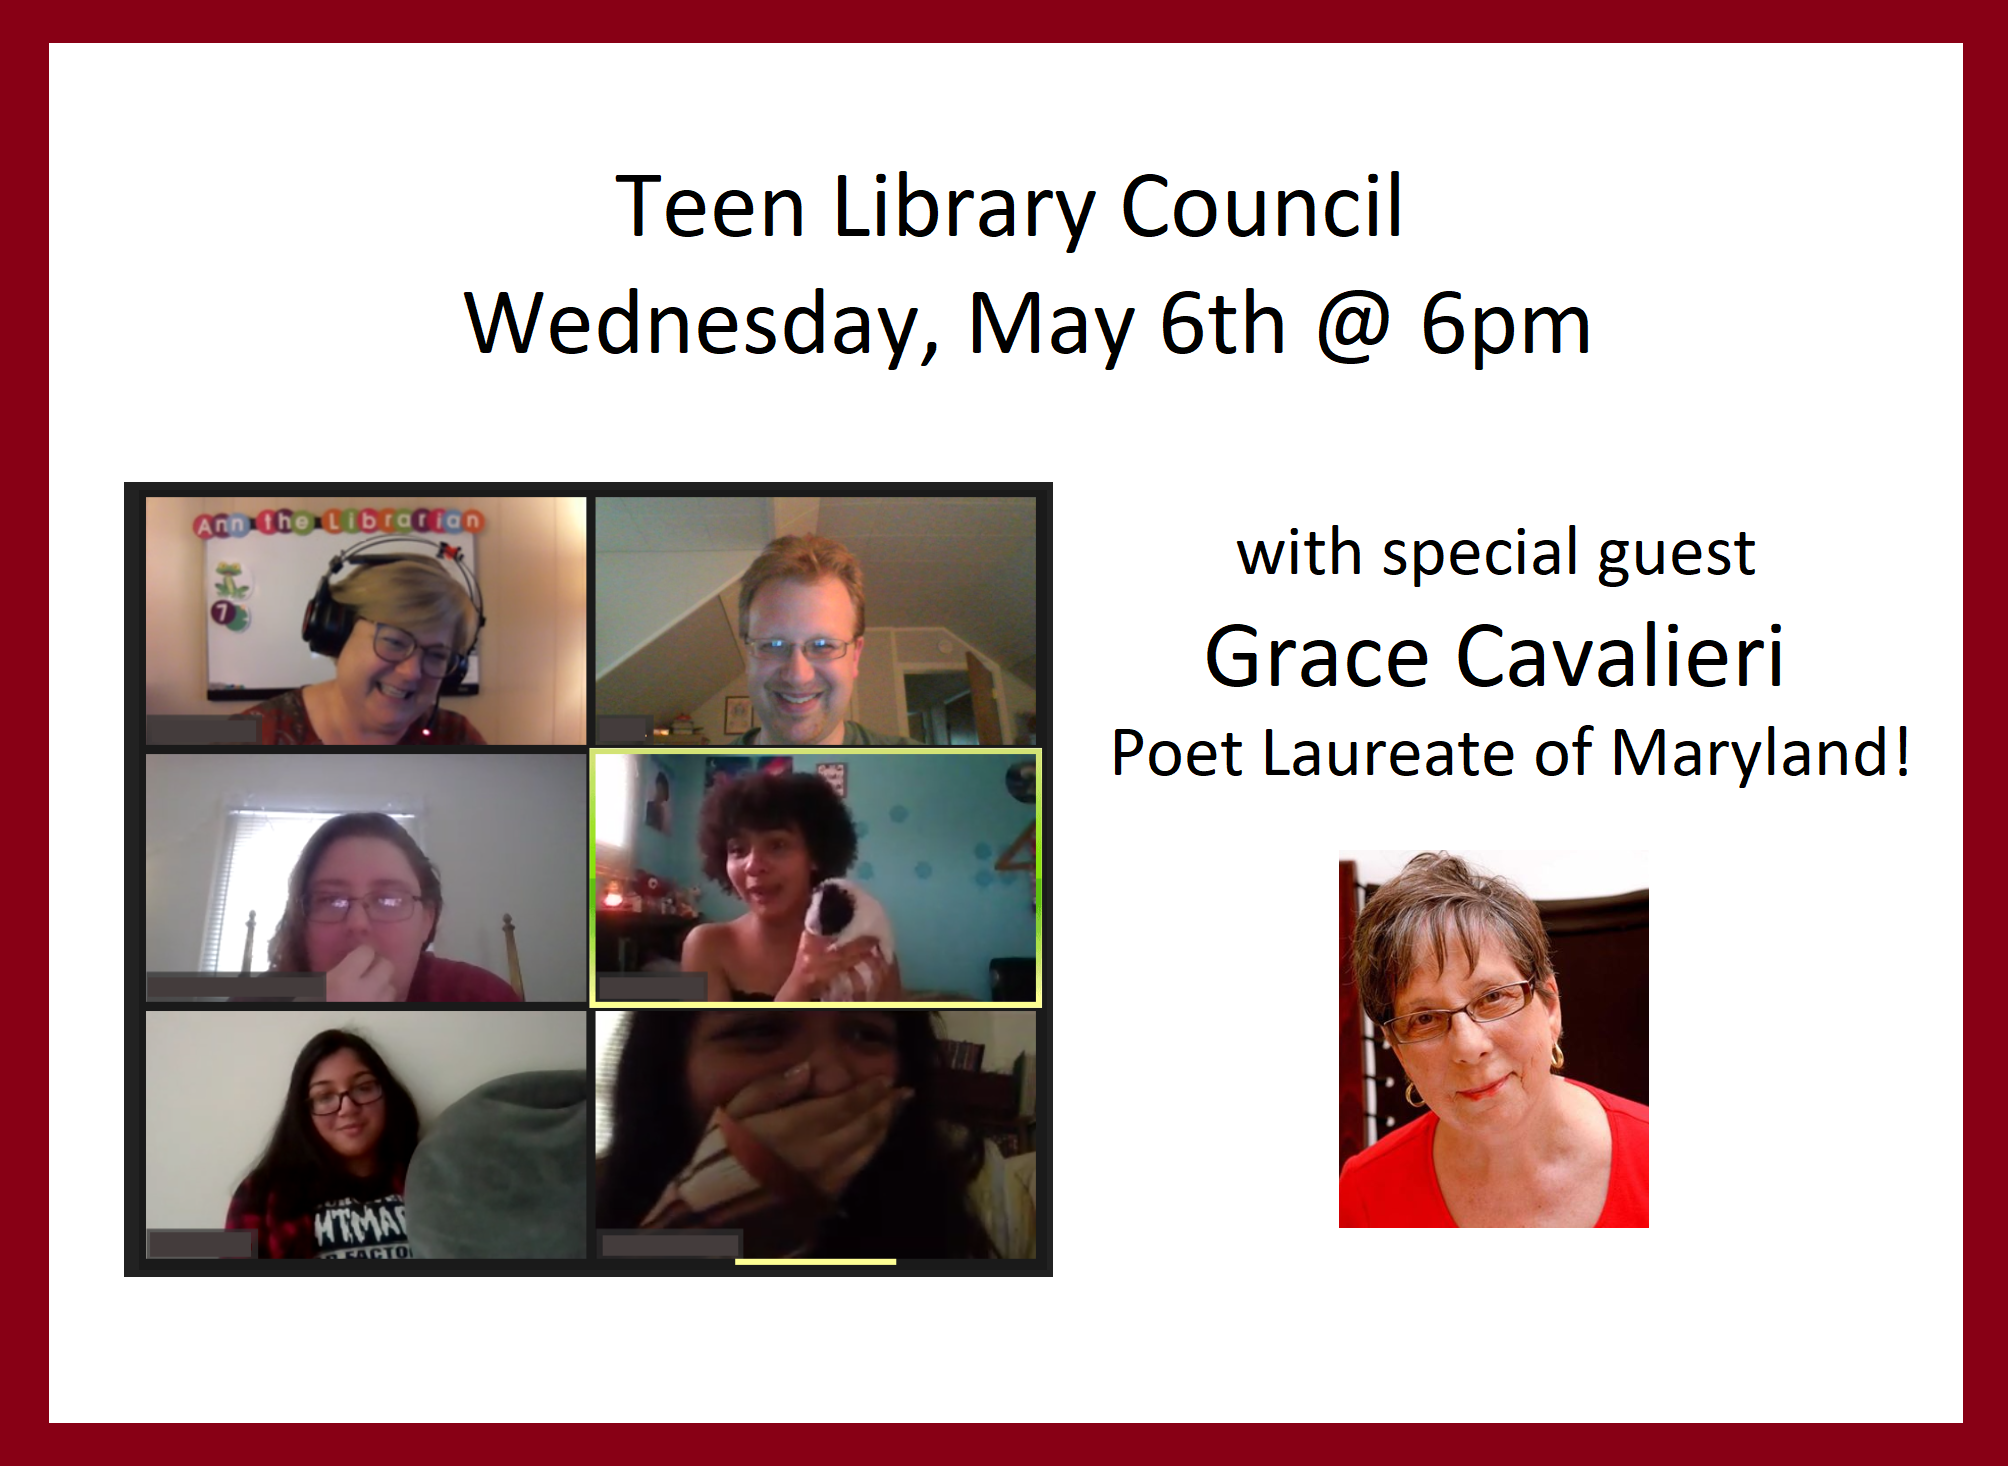 Teen Library Council - with special guest Grace Cavalieri